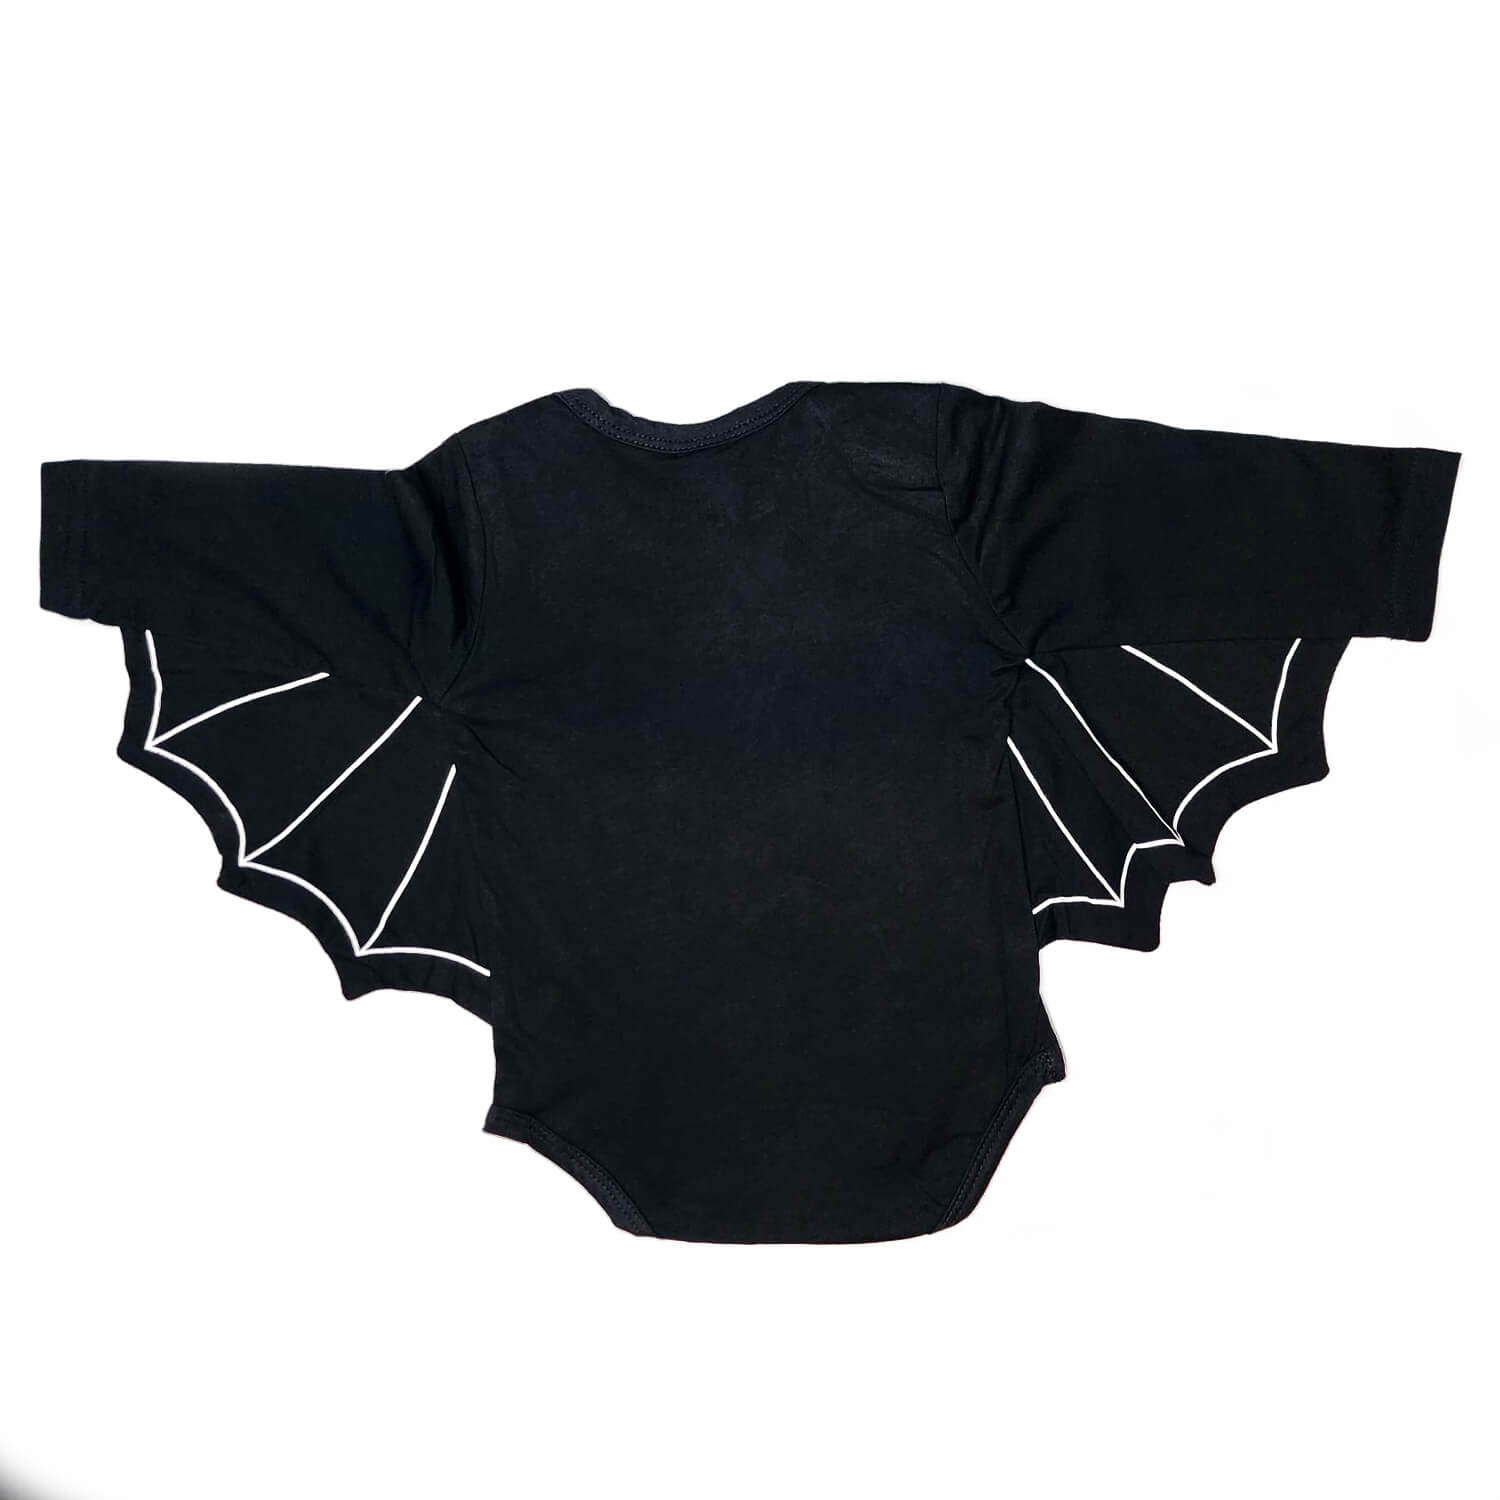 Black bat baby costume back- onesie with arms out to show wings